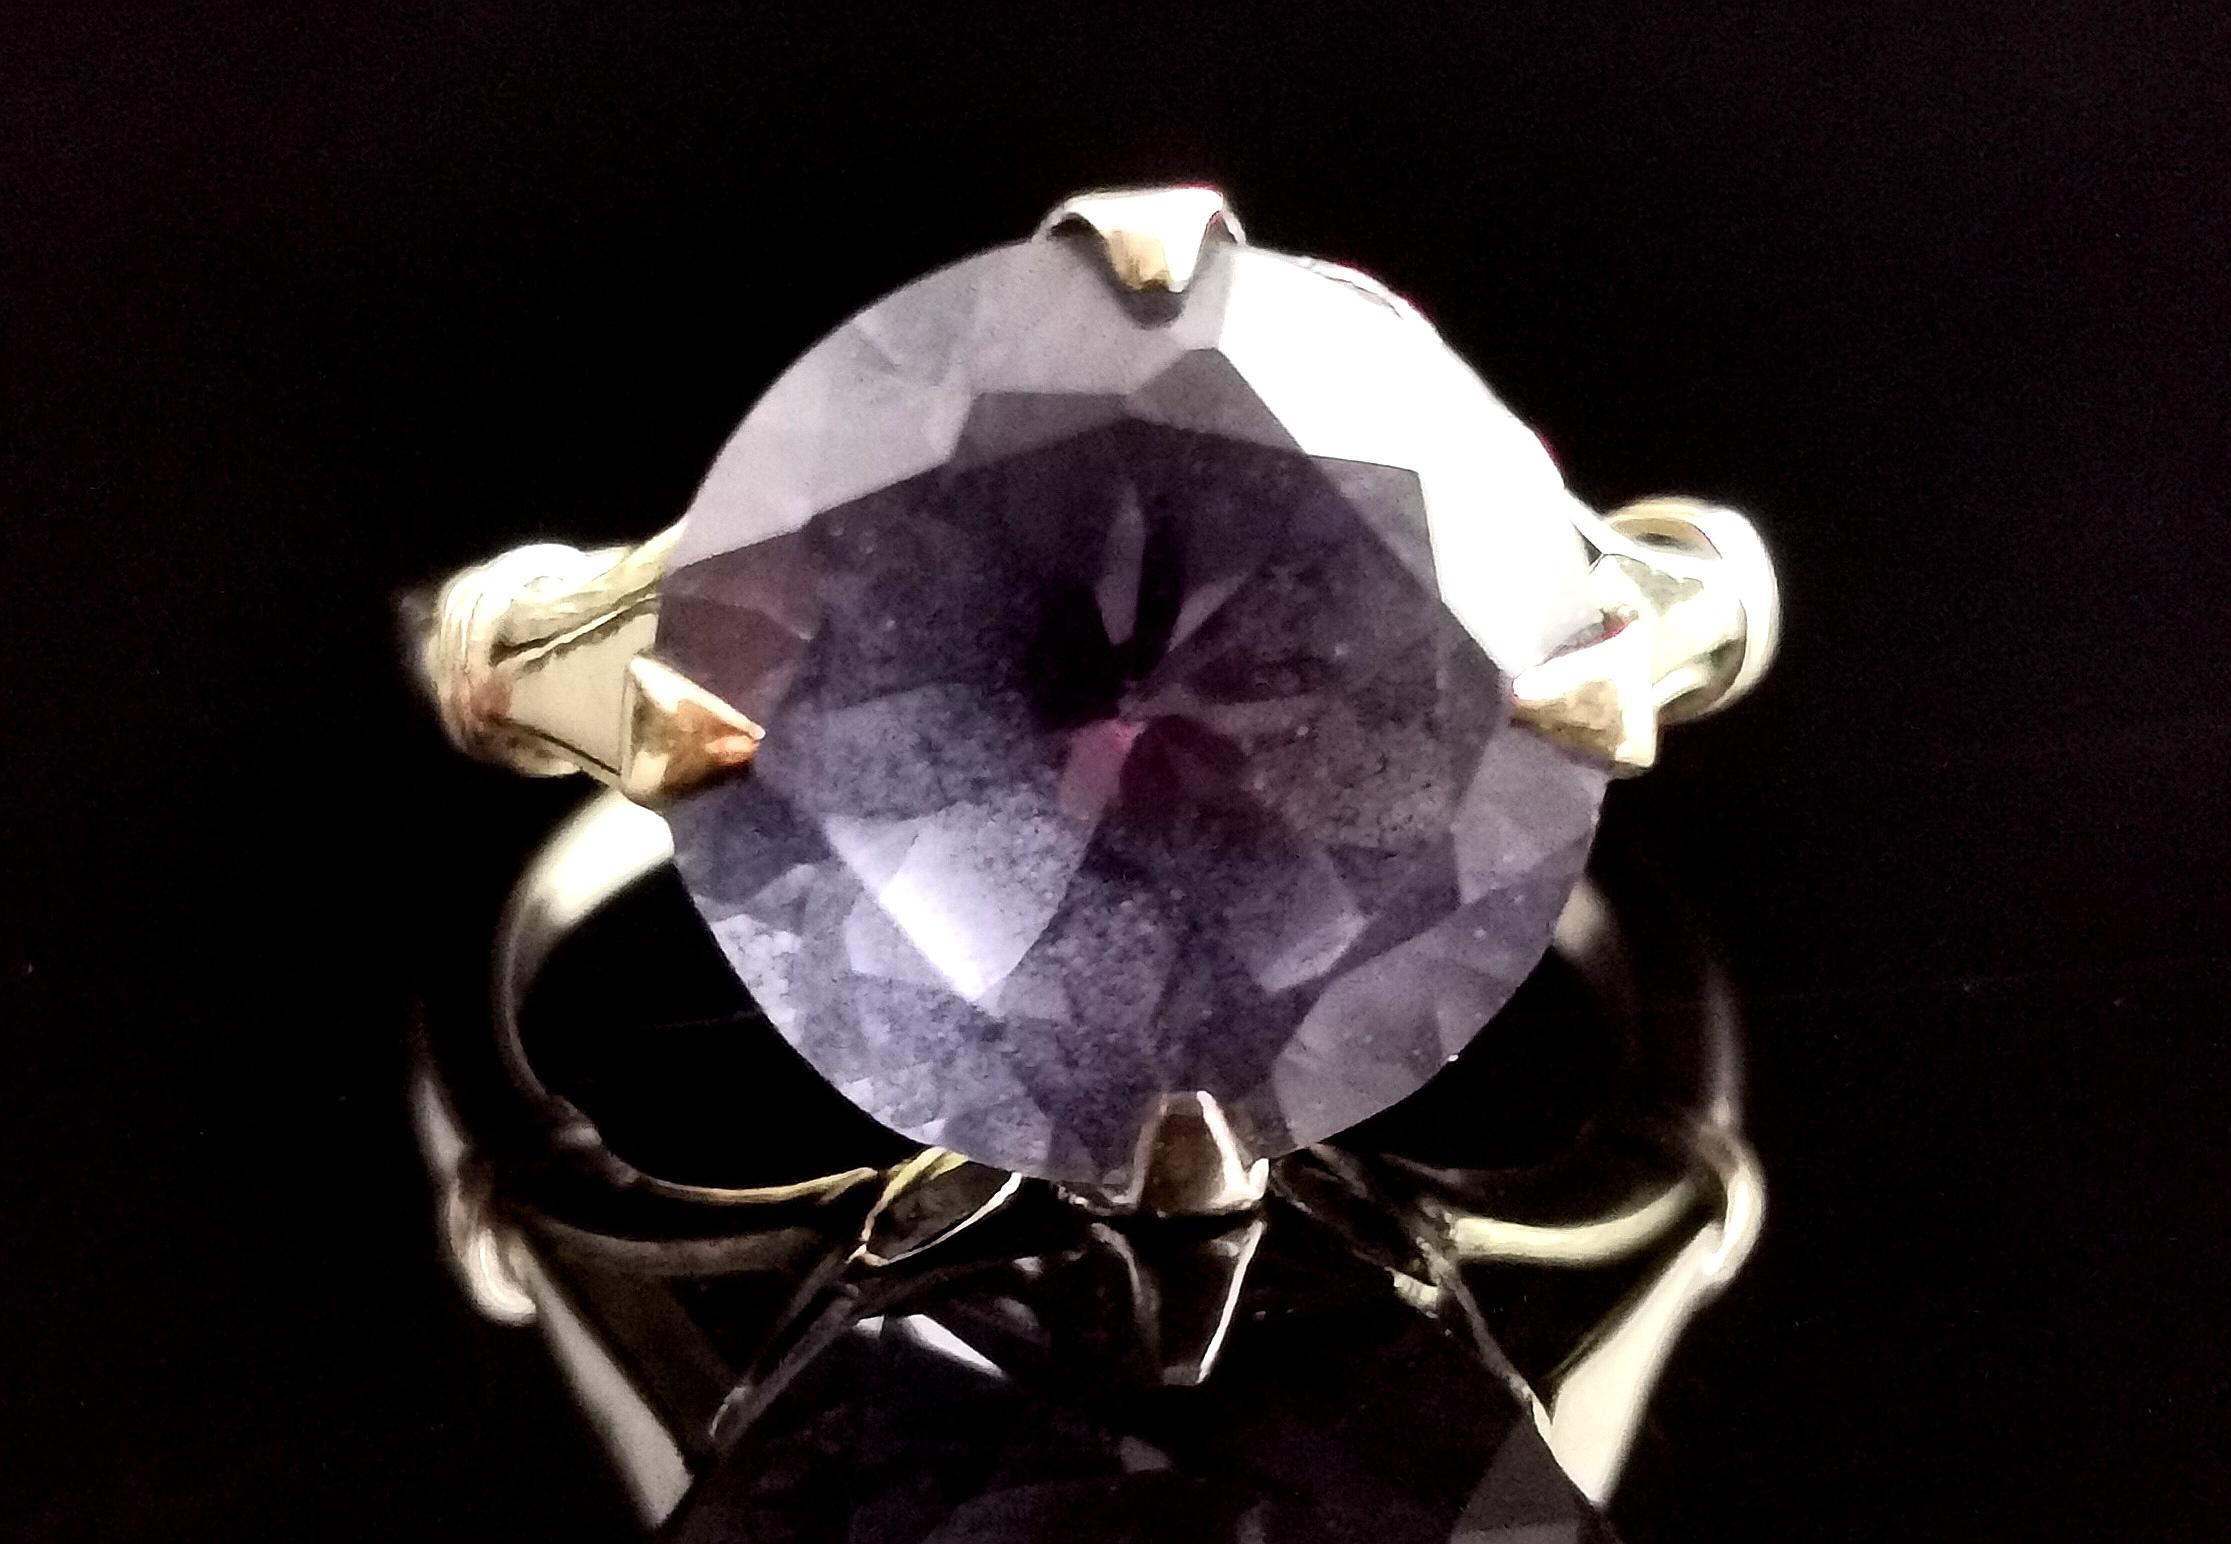 A gorgeous vintage, retro era, c1940s Synthetic colour change sapphire ring.

This ring is all about the centre stone, it has a wonderful array of tones in different lights ranging from indigo blue to warm purple.

It has a smooth 9kt yellow gold